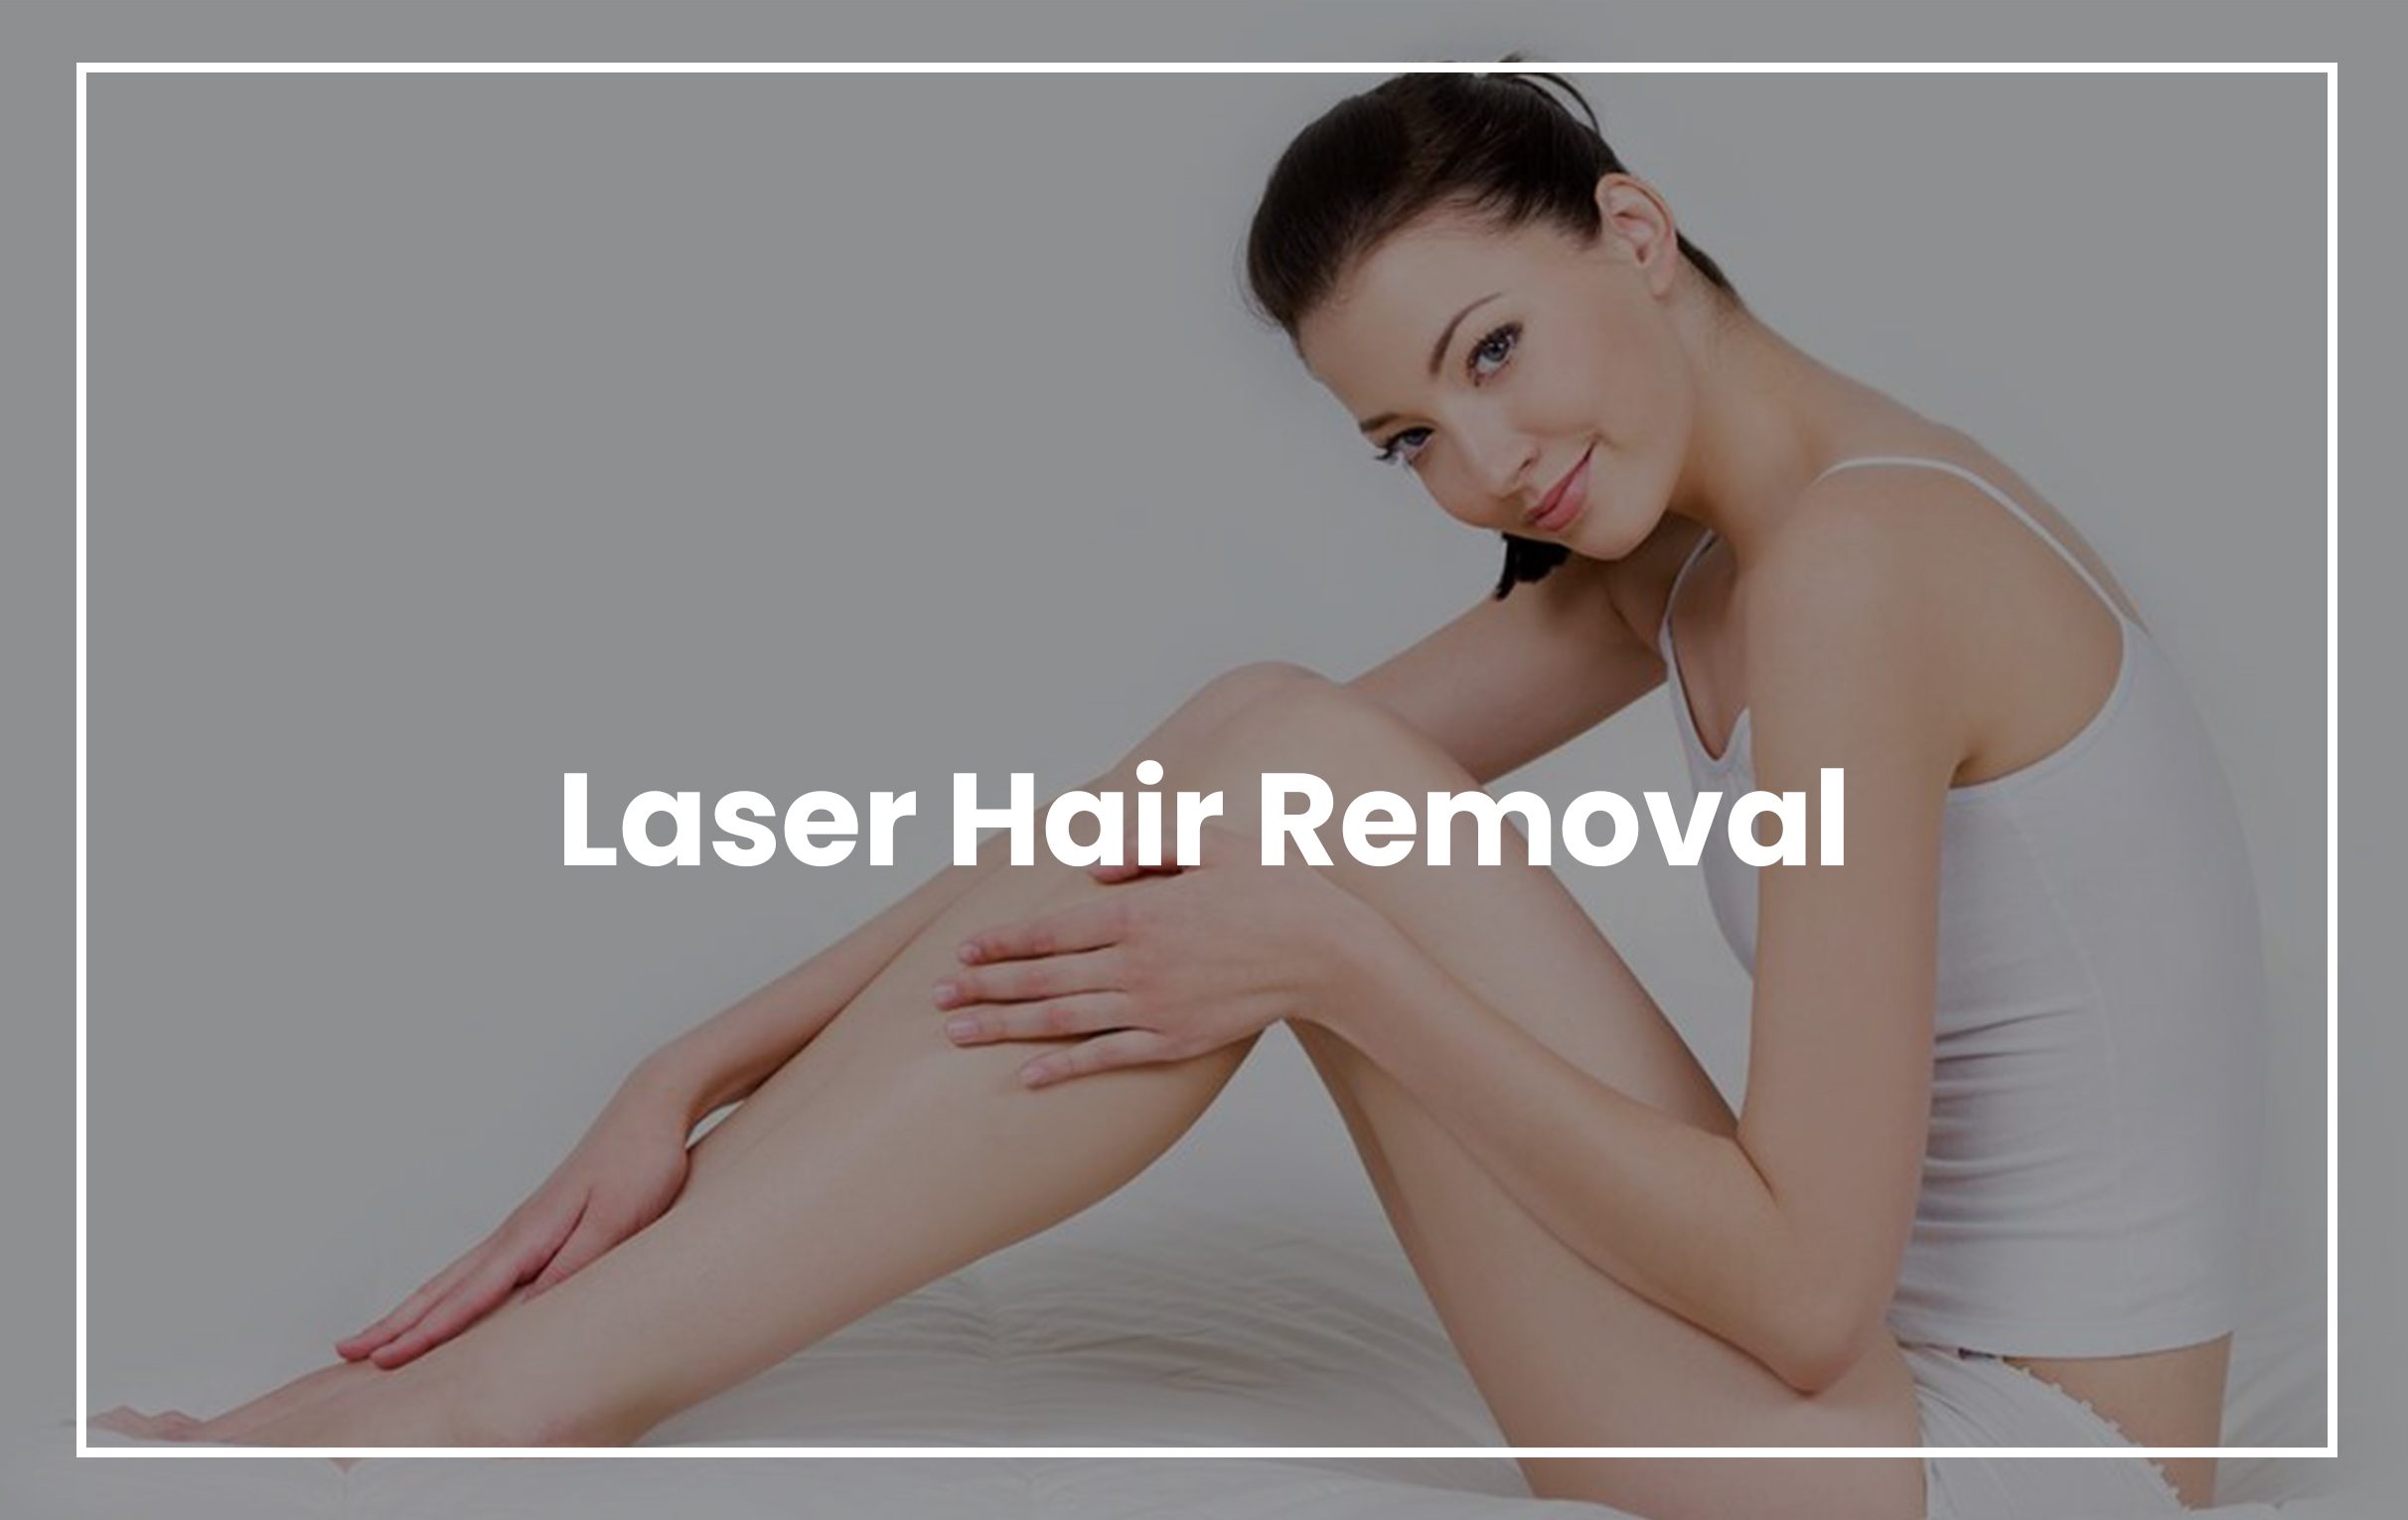 Laser hair Removal price list at Rejuvie aesthetic and dermatology Bali